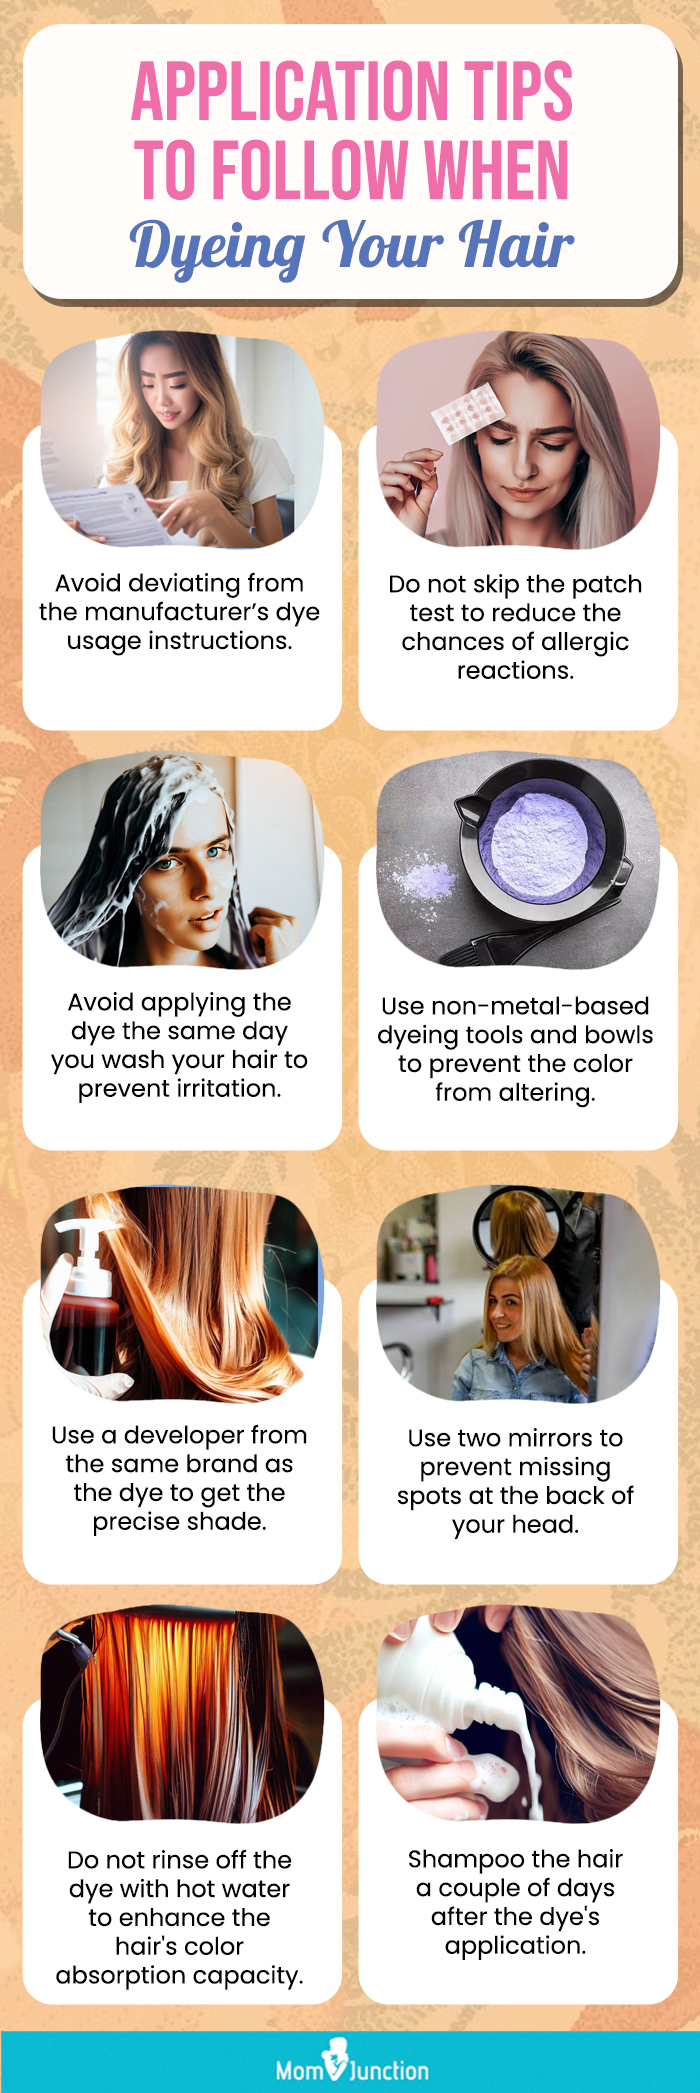 Application Tips To Follow When Dyeing Your Hair (infographic)